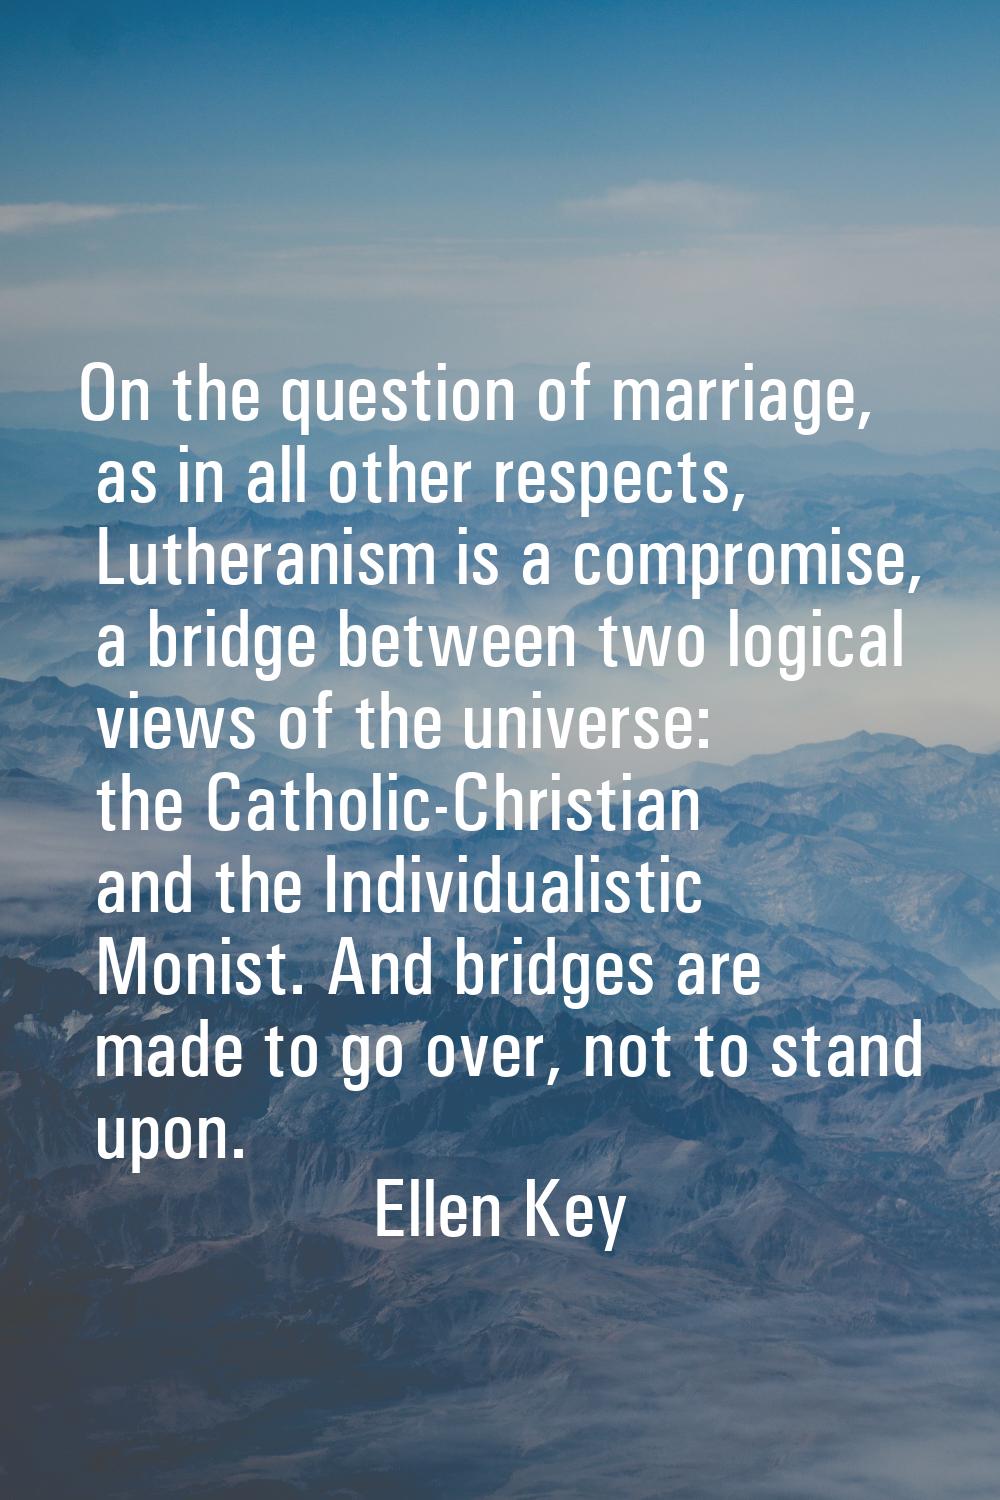 On the question of marriage, as in all other respects, Lutheranism is a compromise, a bridge betwee